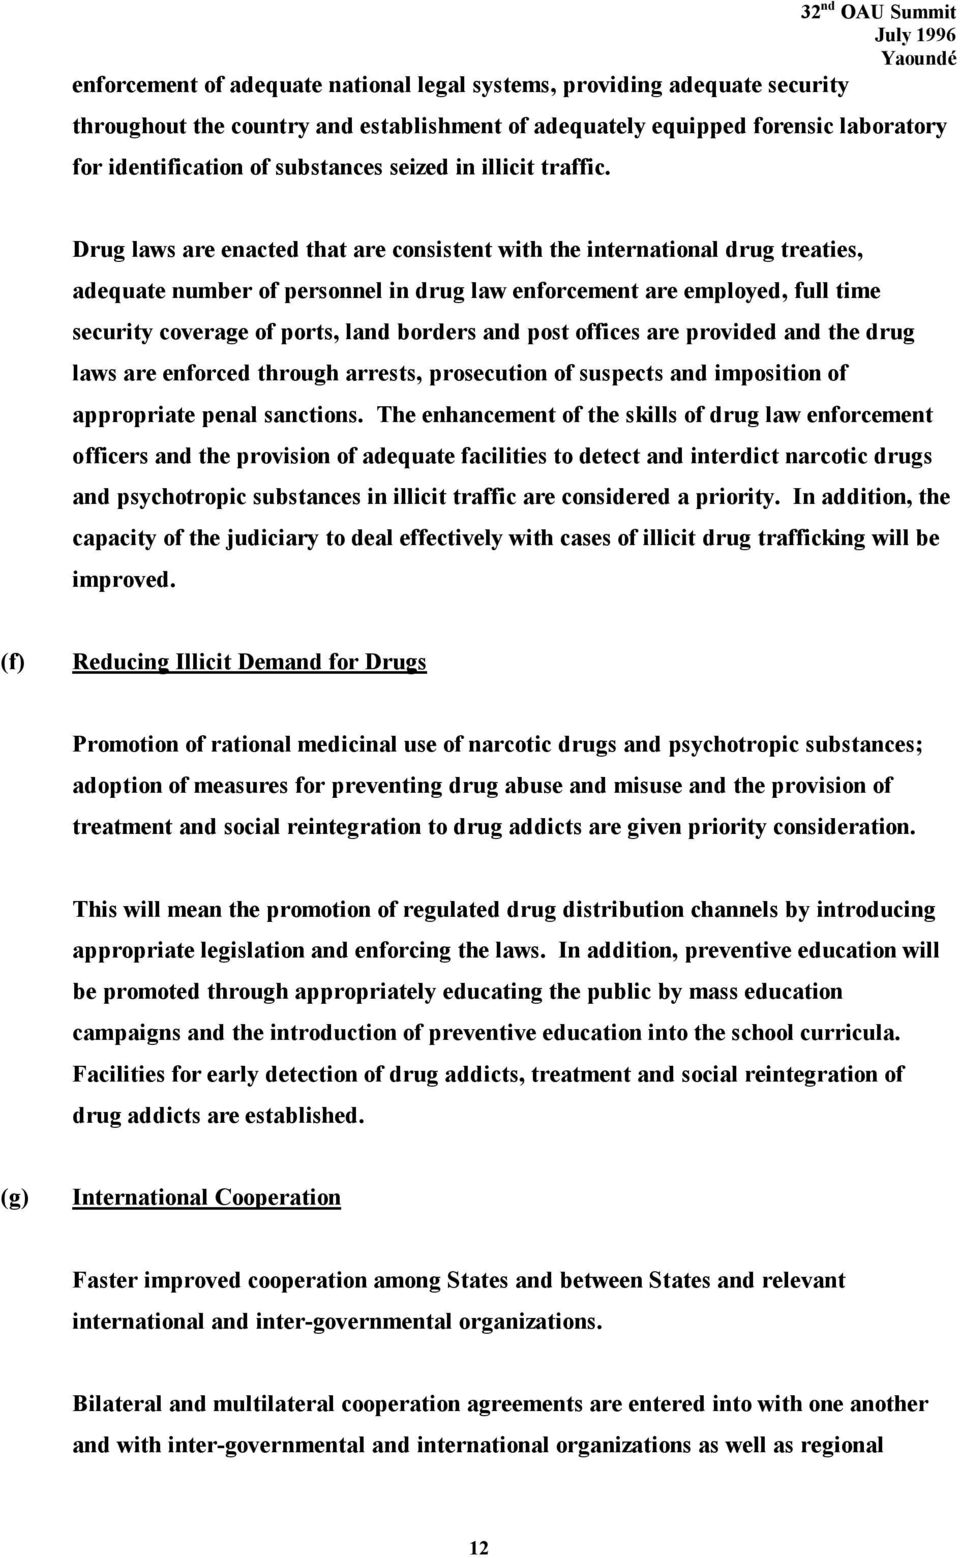 Drug laws are enacted that are consistent with the international drug treaties, adequate number of personnel in drug law enforcement are employed, full time security coverage of ports, land borders